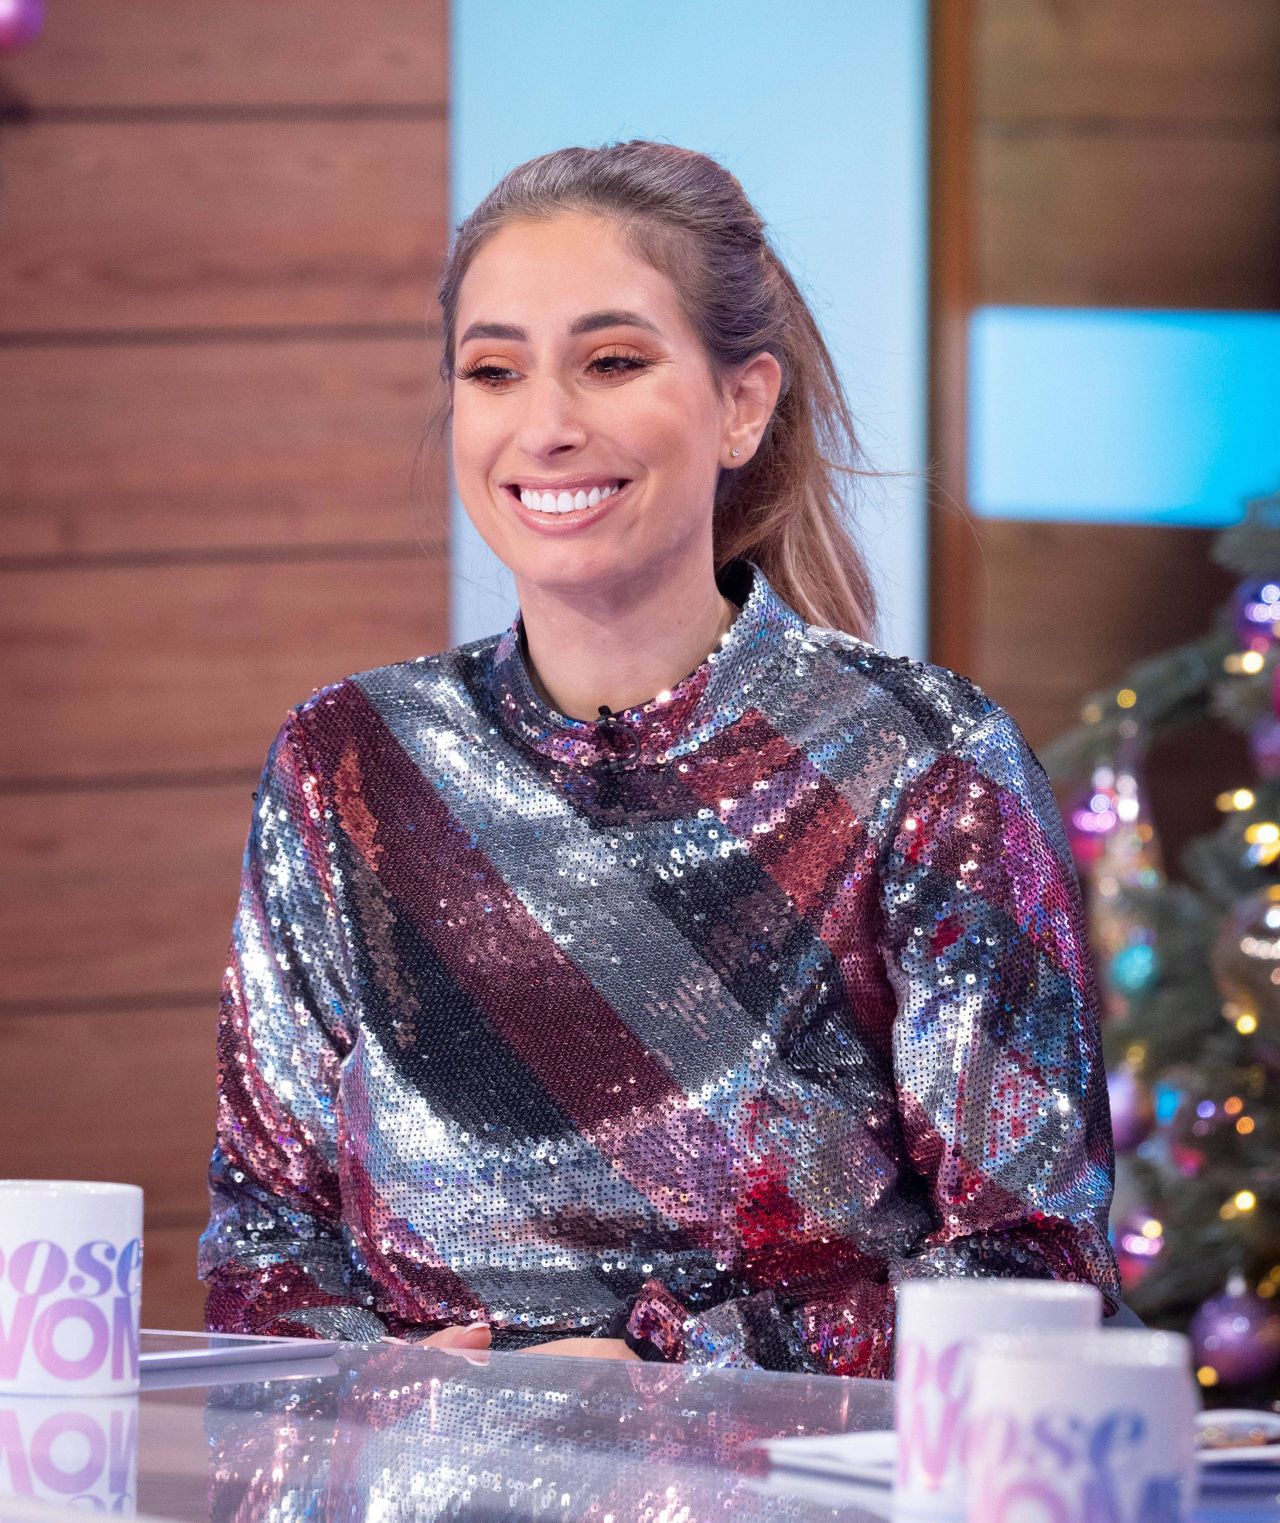 Stacey Solomon Style Clothes Outfits And Fashion